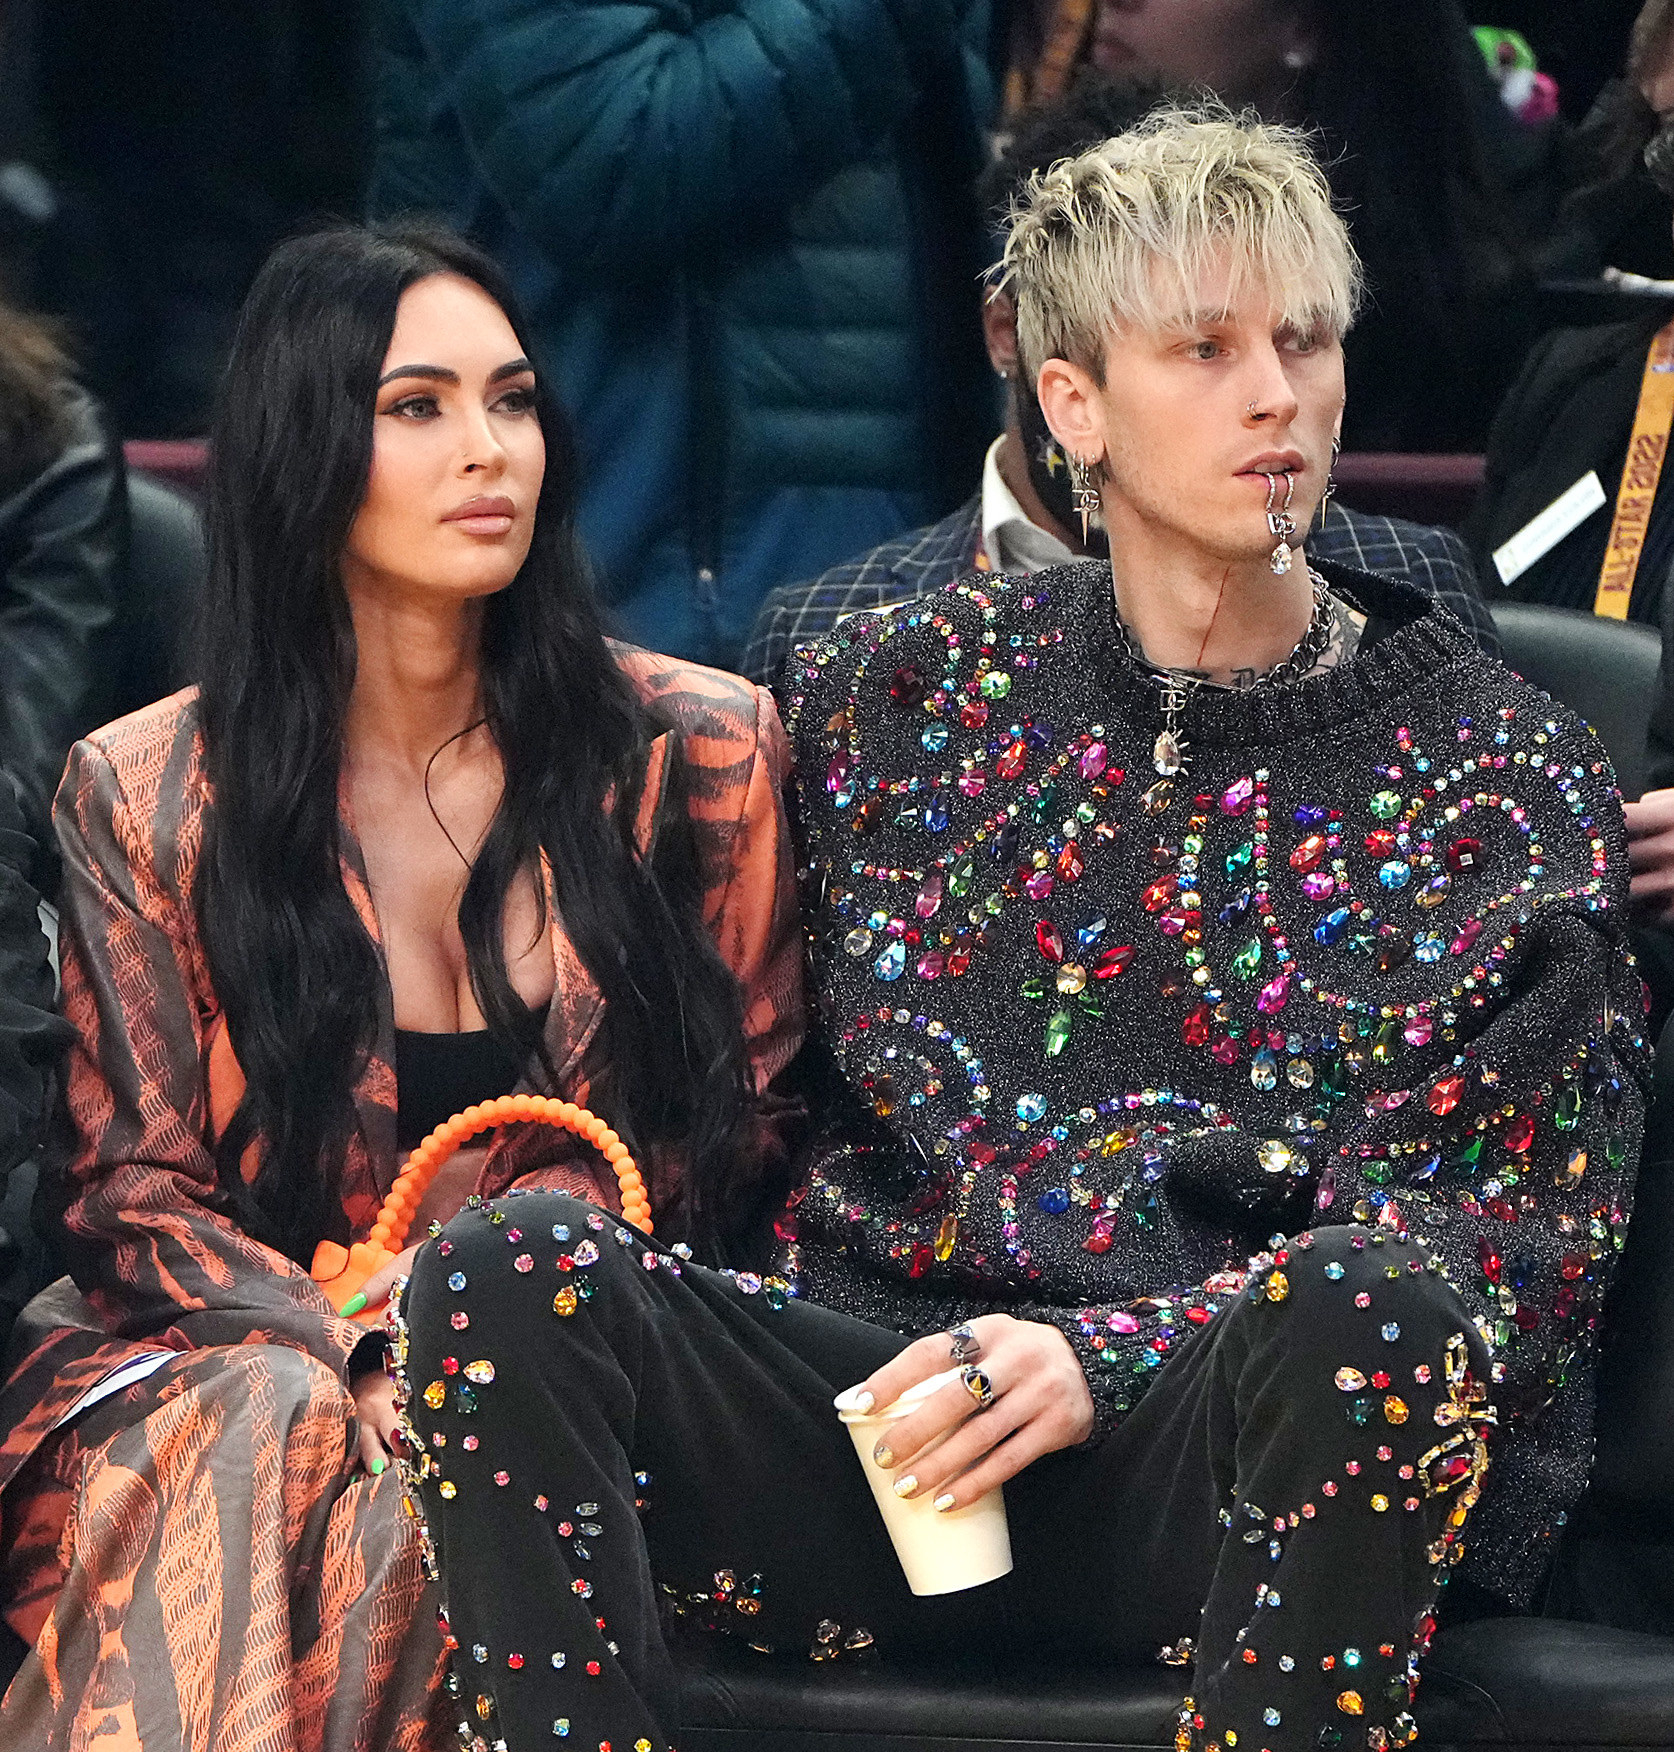 Megan and MGK sitting and watching a sports activity in a stadium